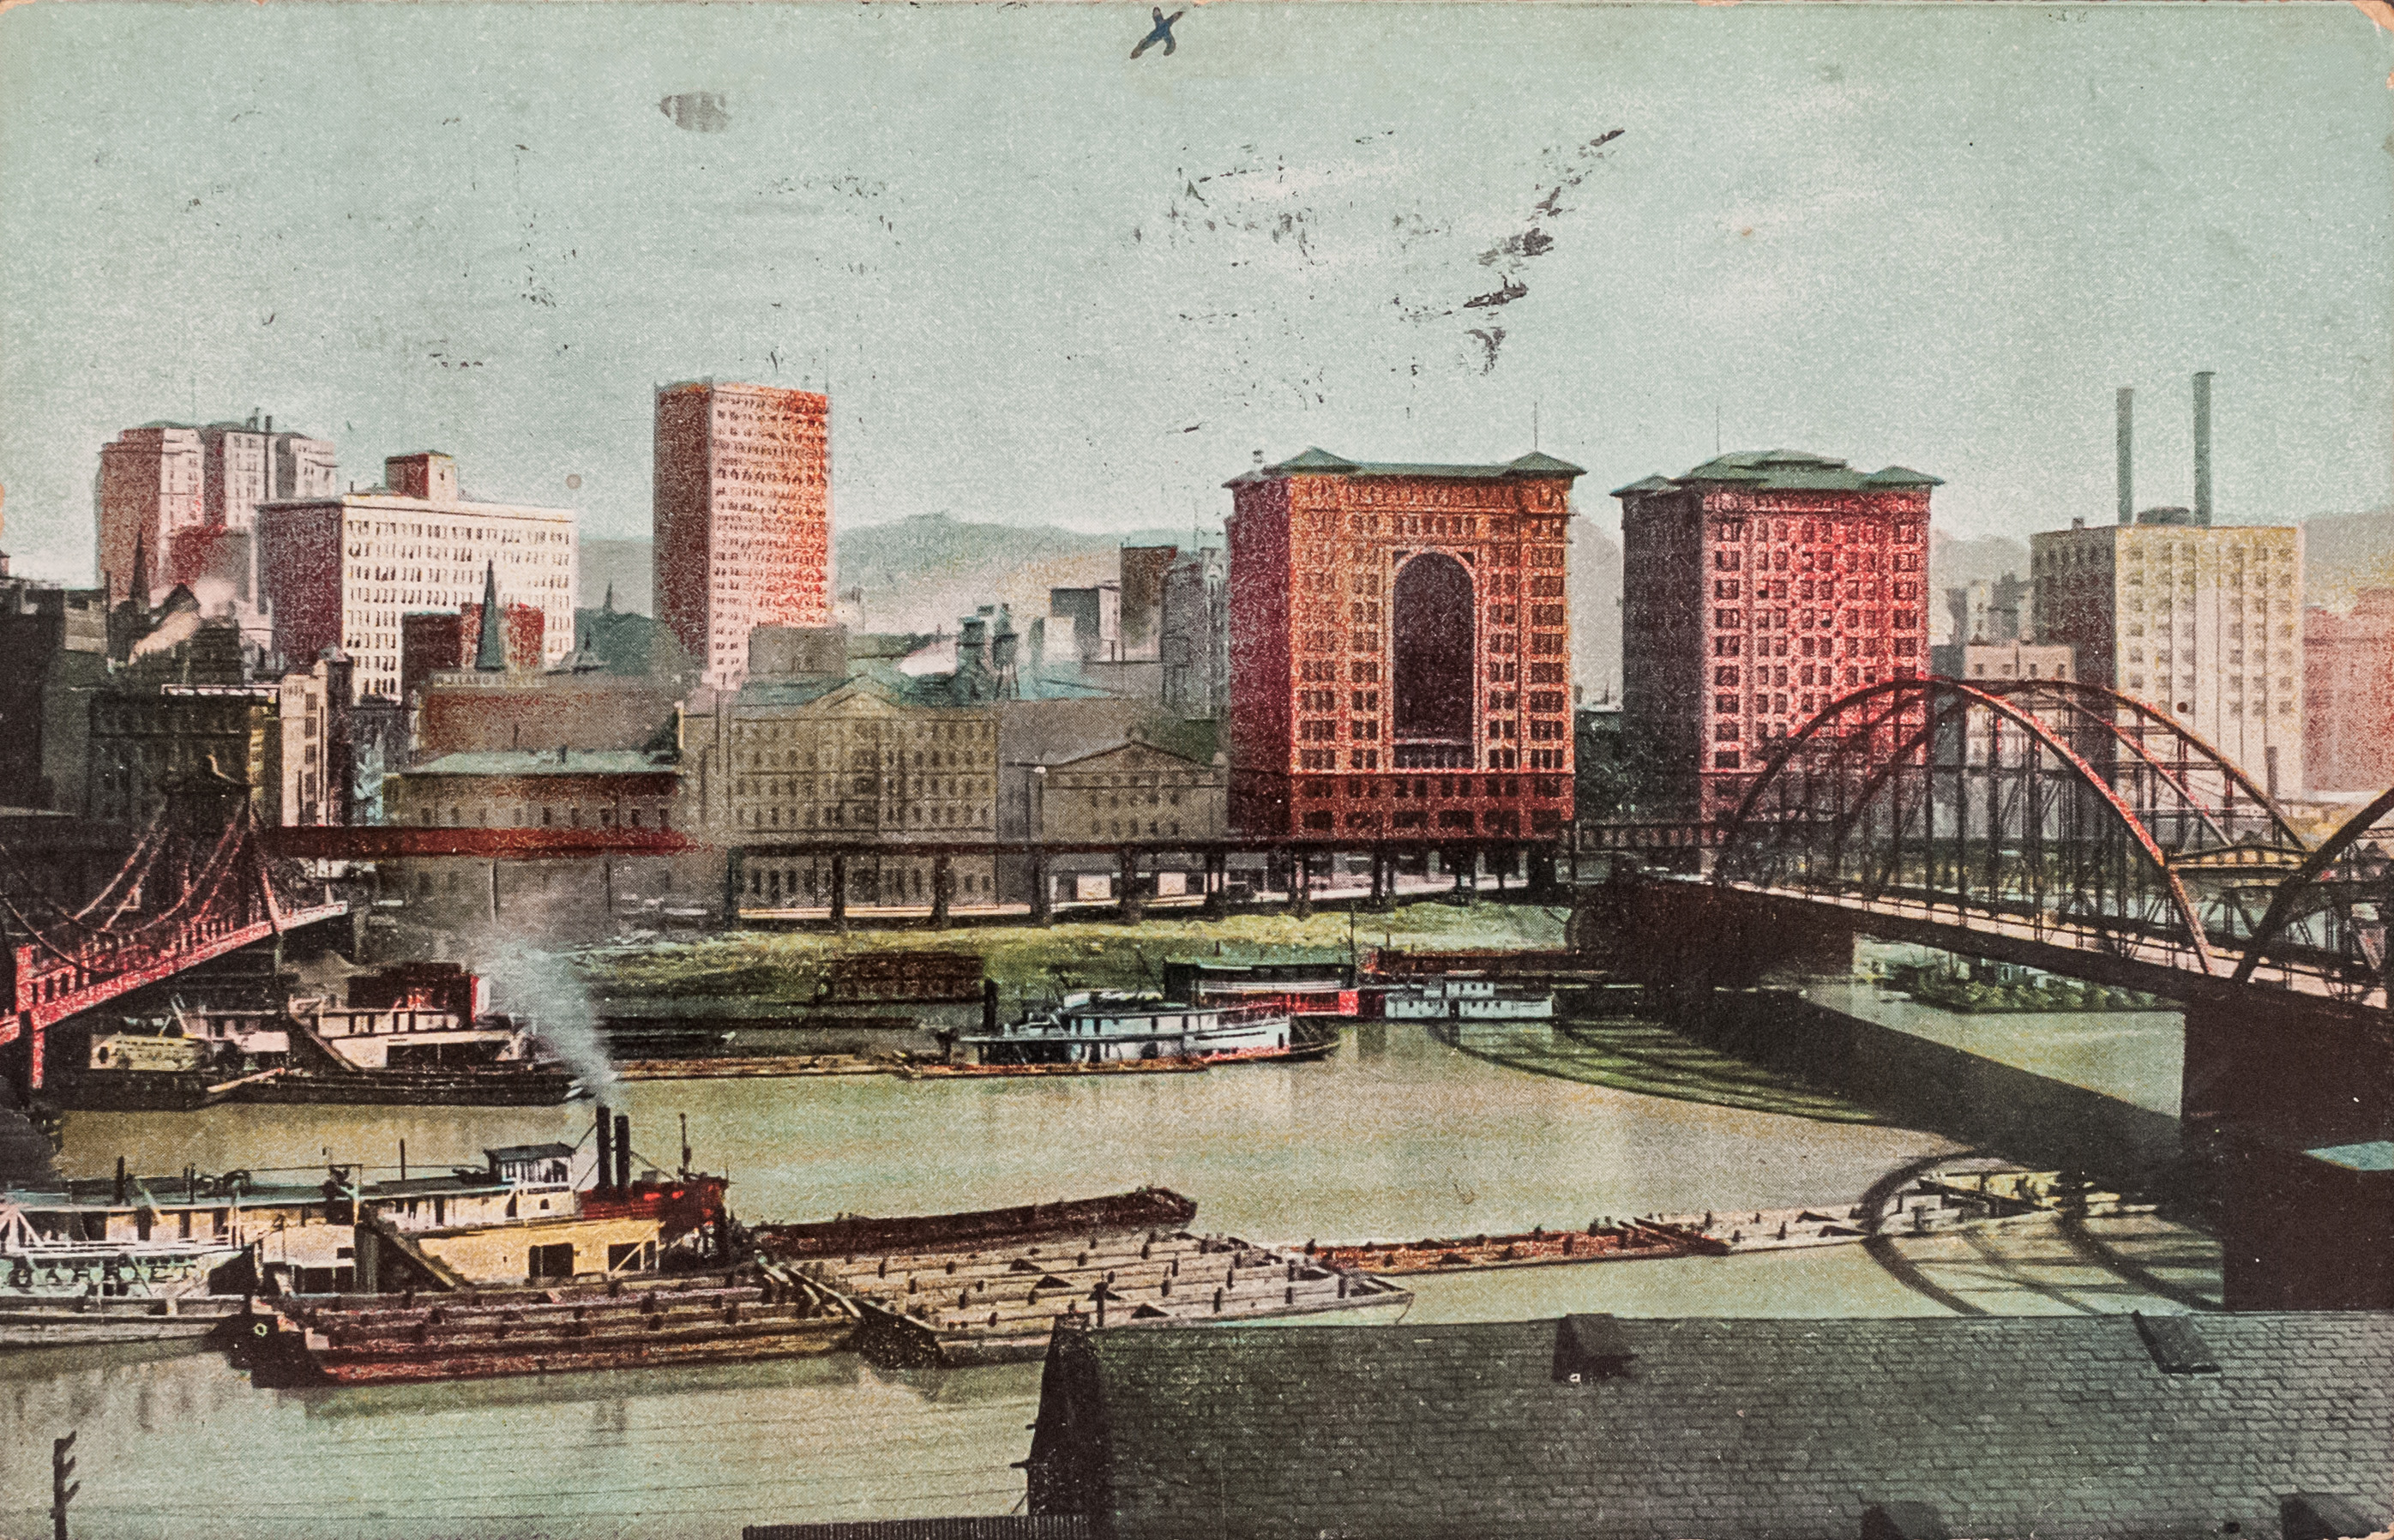 Old landscape image of Pittsburgh, with a focus on the river. A large 'X' has been written on the top of the image by hand.